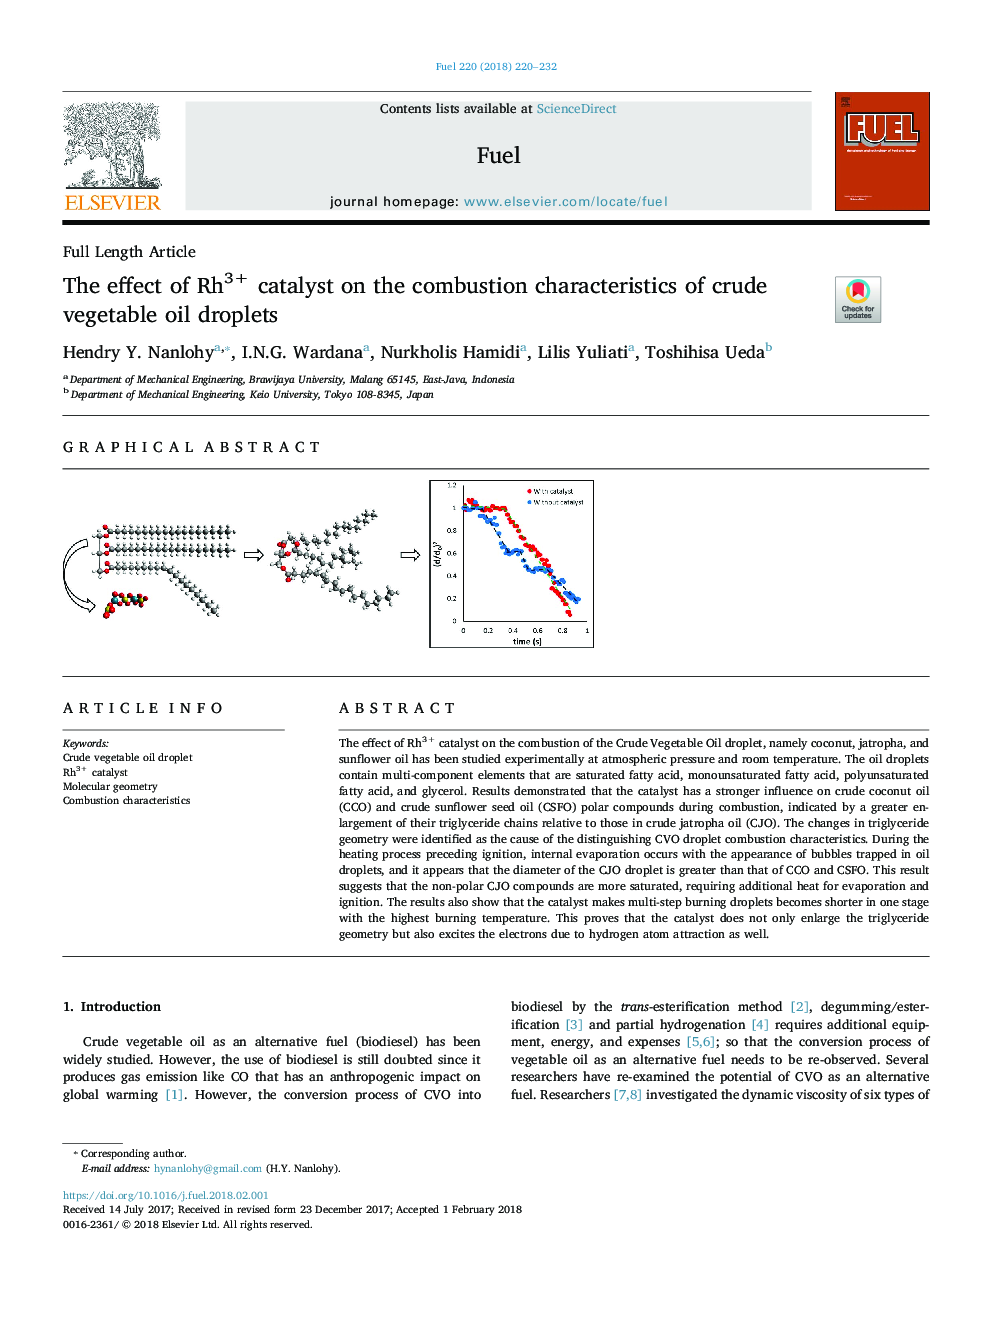 The effect of Rh3+ catalyst on the combustion characteristics of crude vegetable oil droplets